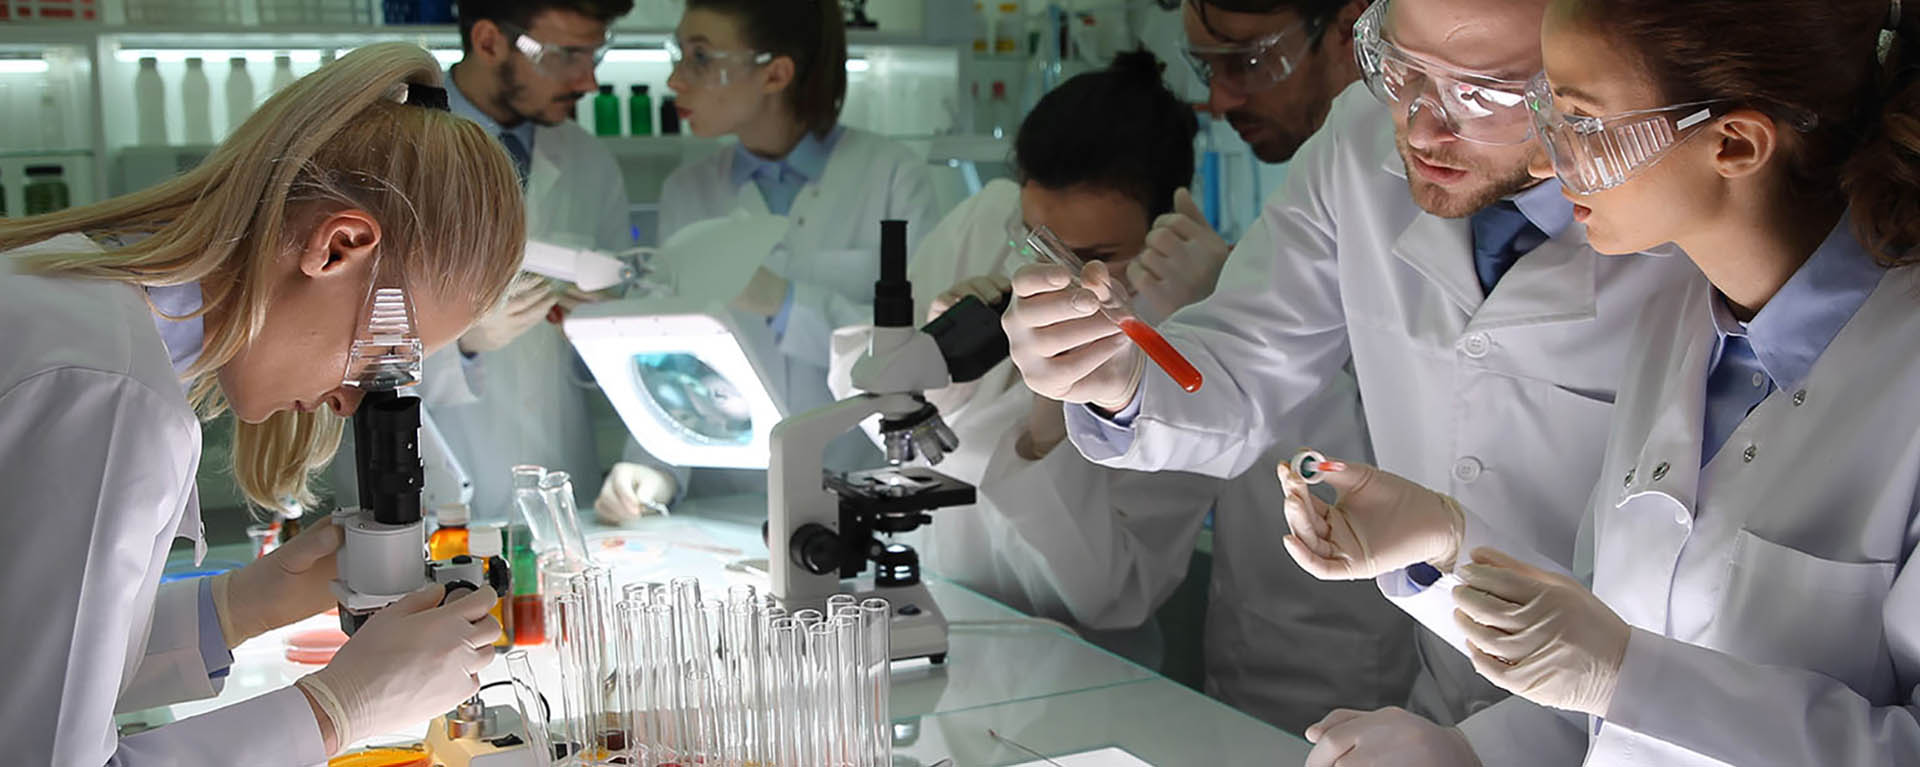 medical laboratory science students working on analysis